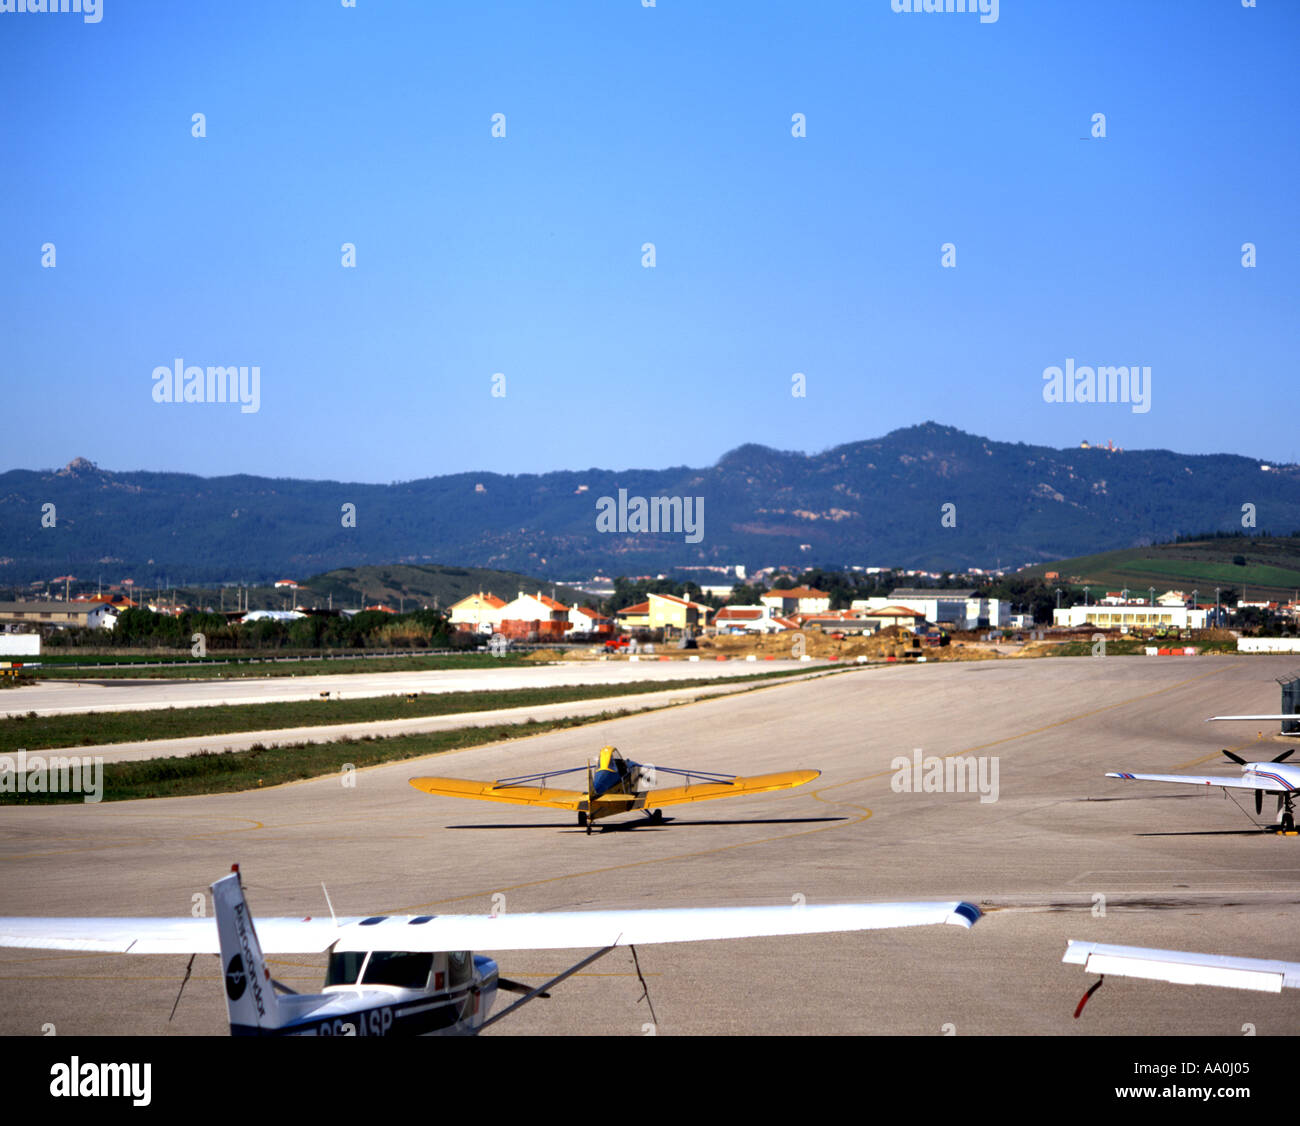 PORTUGAL Tires village Estremadura Province Tires airport light plains on runway mountain beyond houses Stock Photo